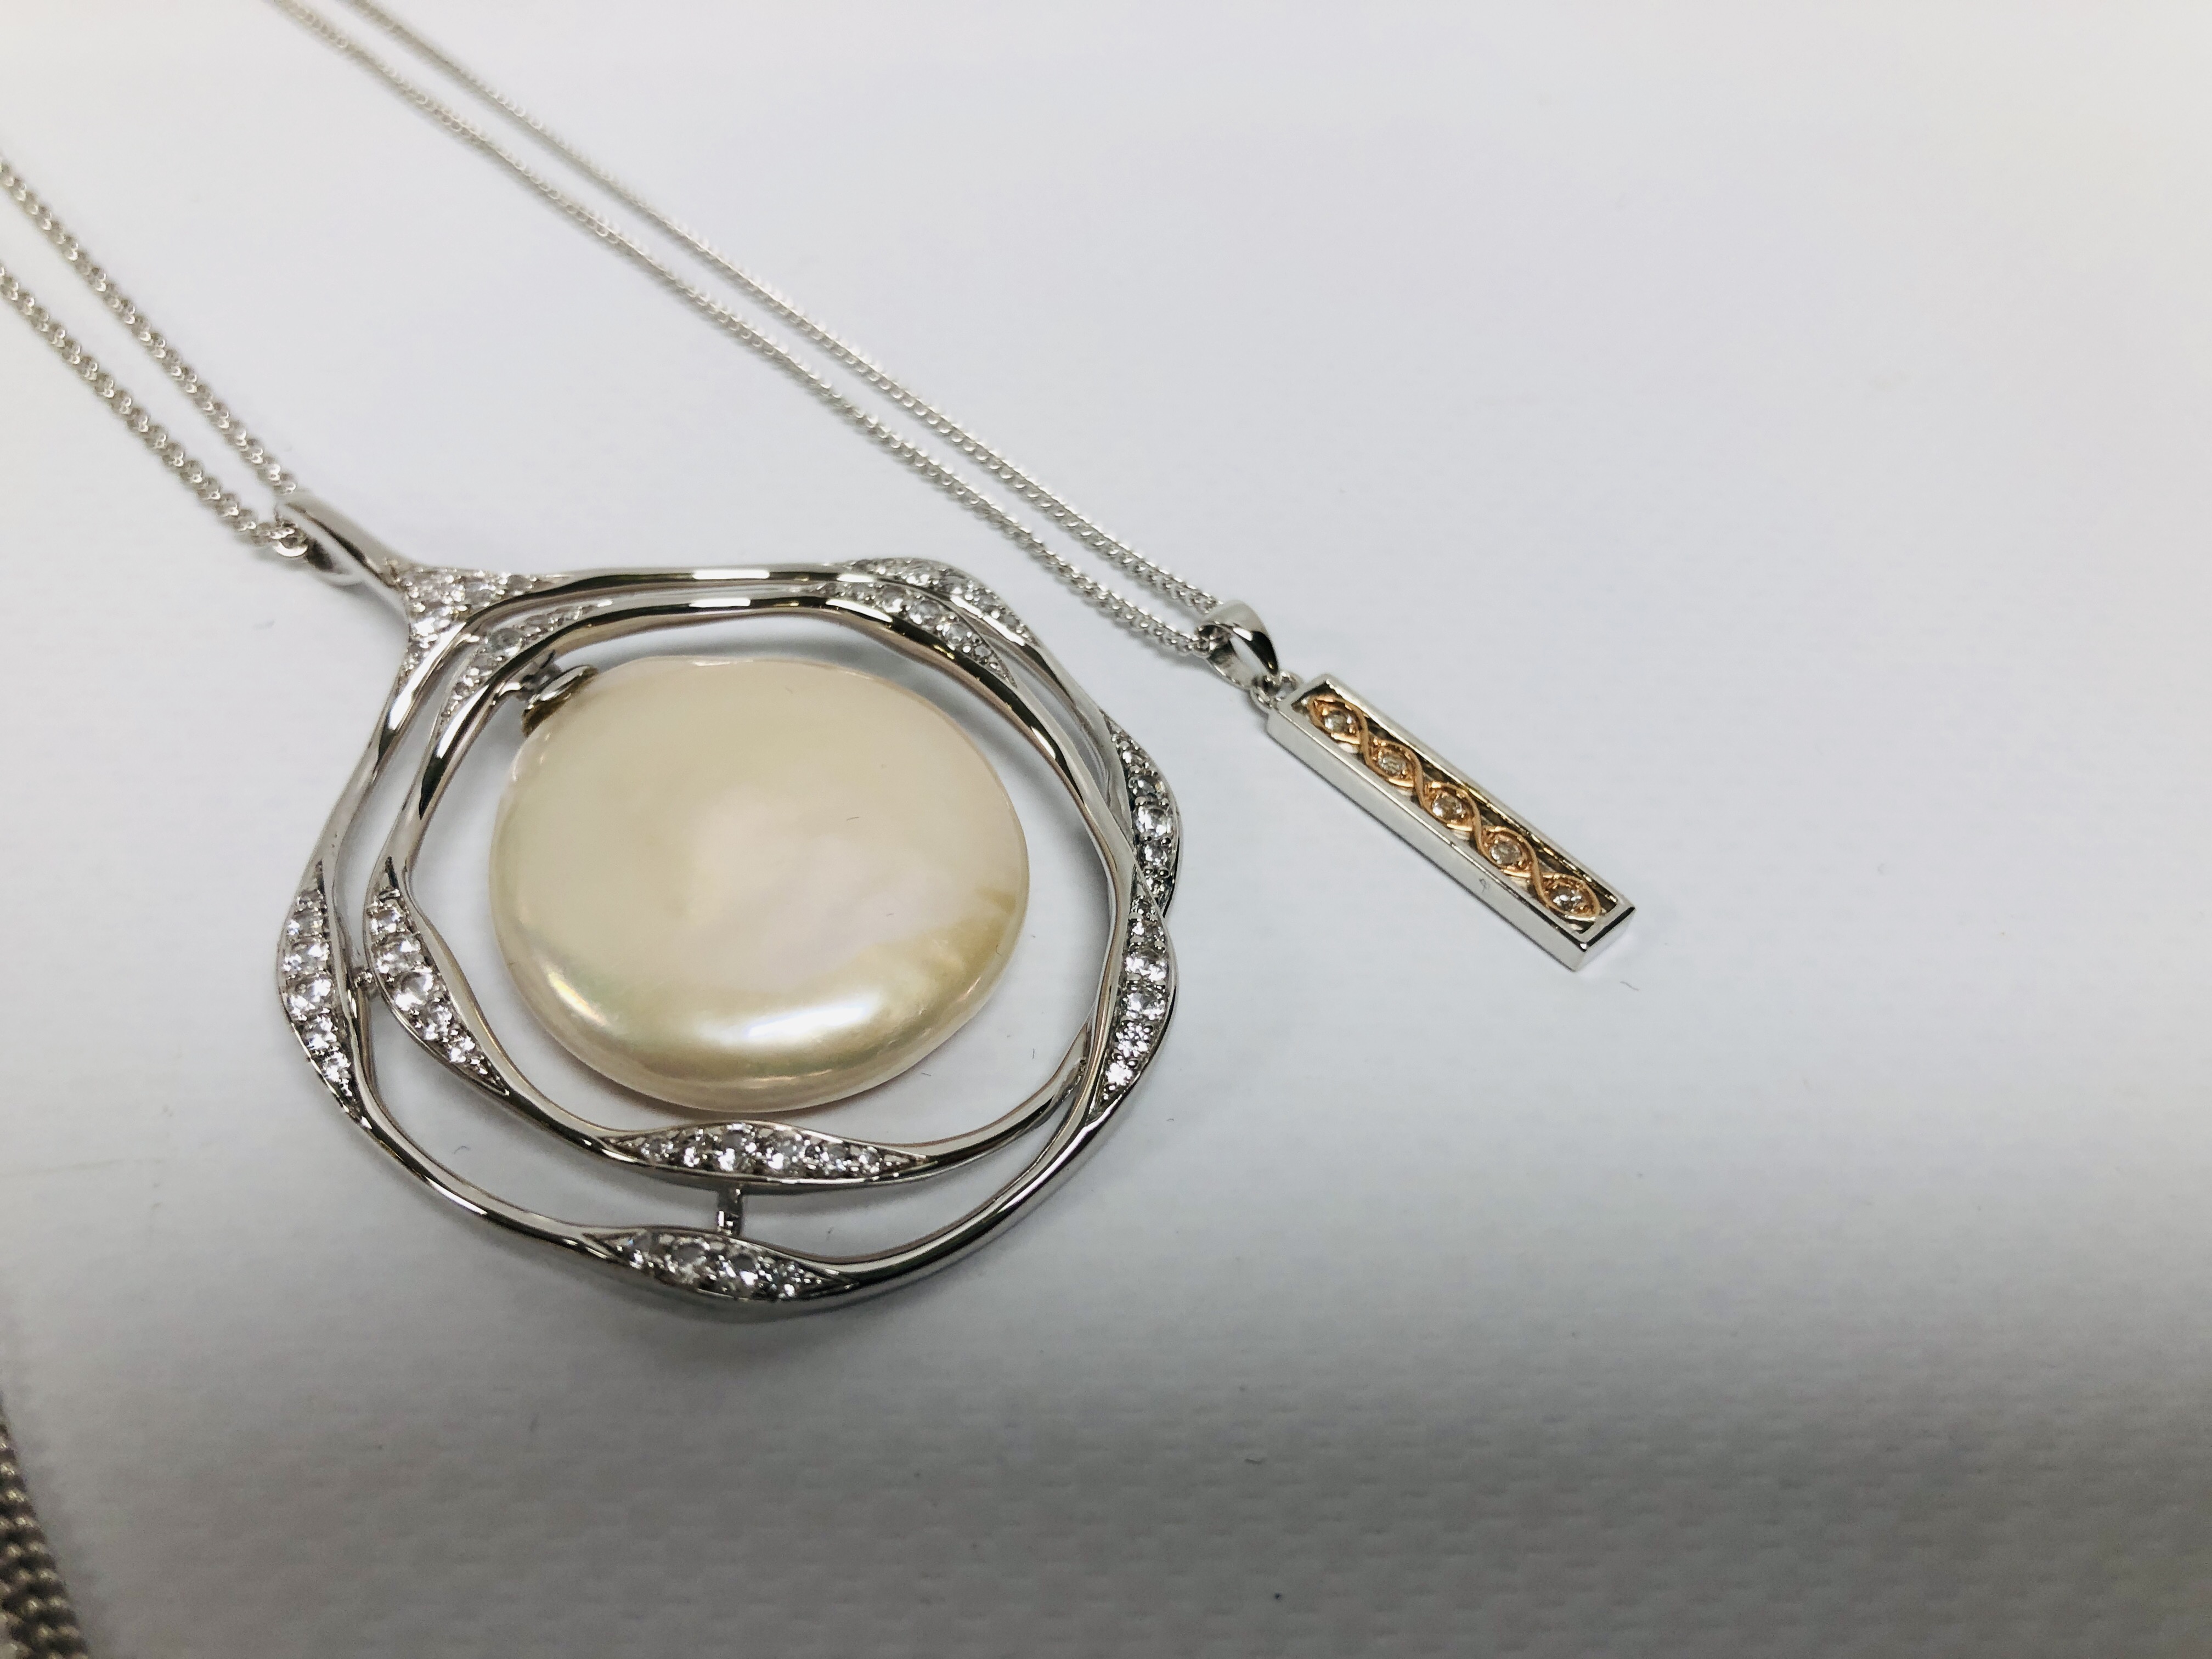 4 X SILVER DESIGNER PENDANT NECKLACES TWO OF WHICH ARE MARKED "CLOGAU" + PAIR OF MULTI PEARL DROP - Image 5 of 7